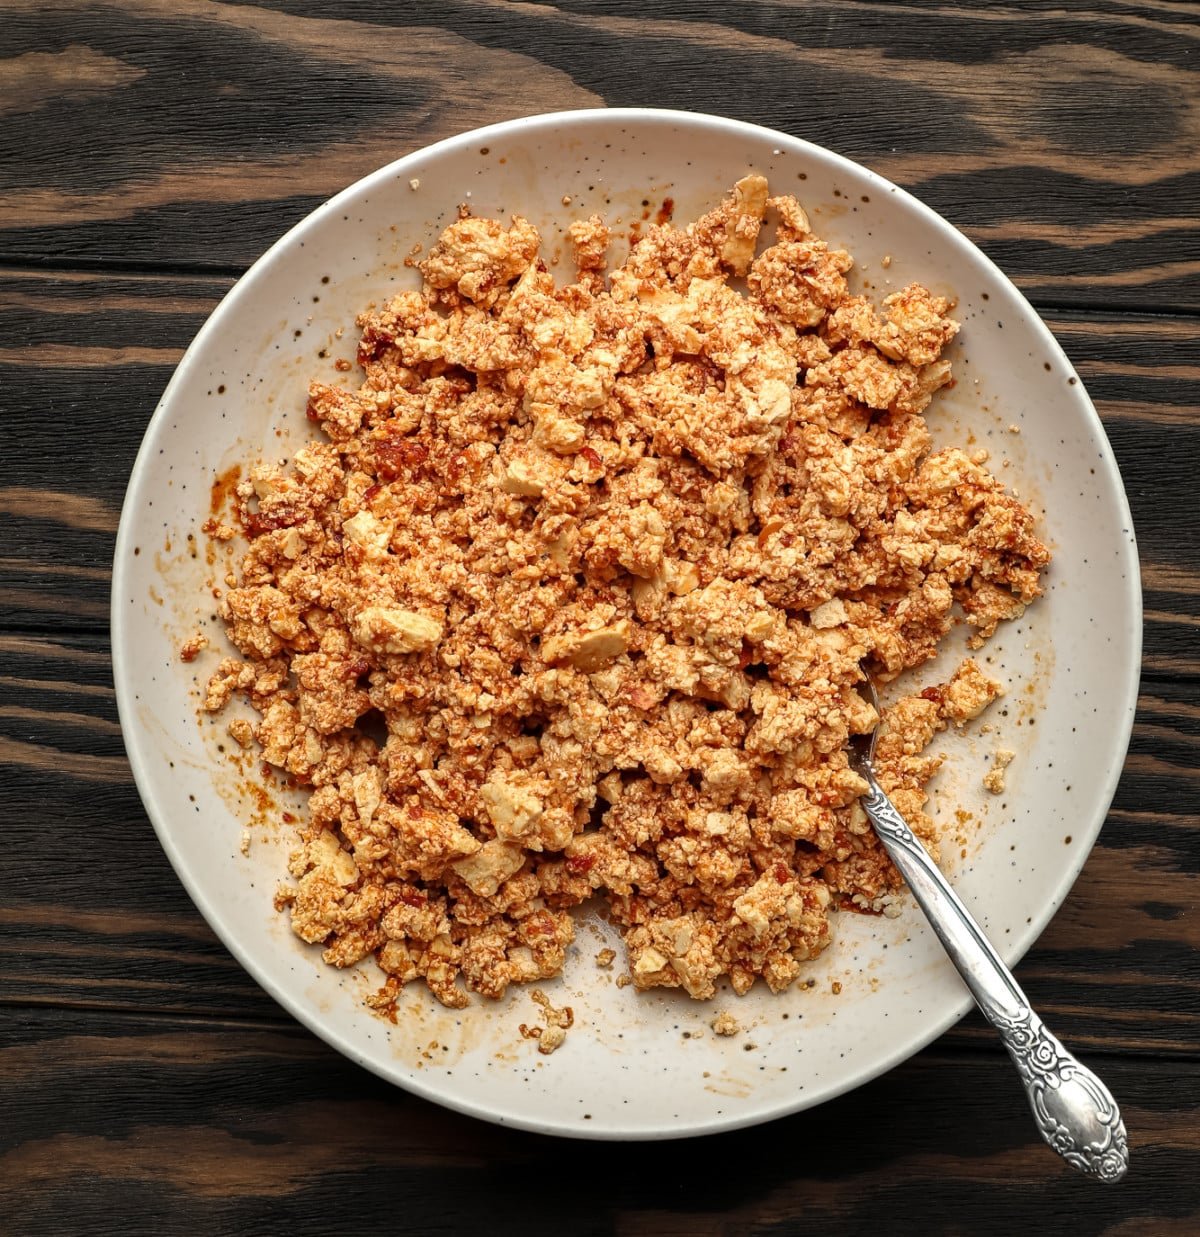 tofu crumbles in a bowl with a spoon, mixed up with a reddish sauce